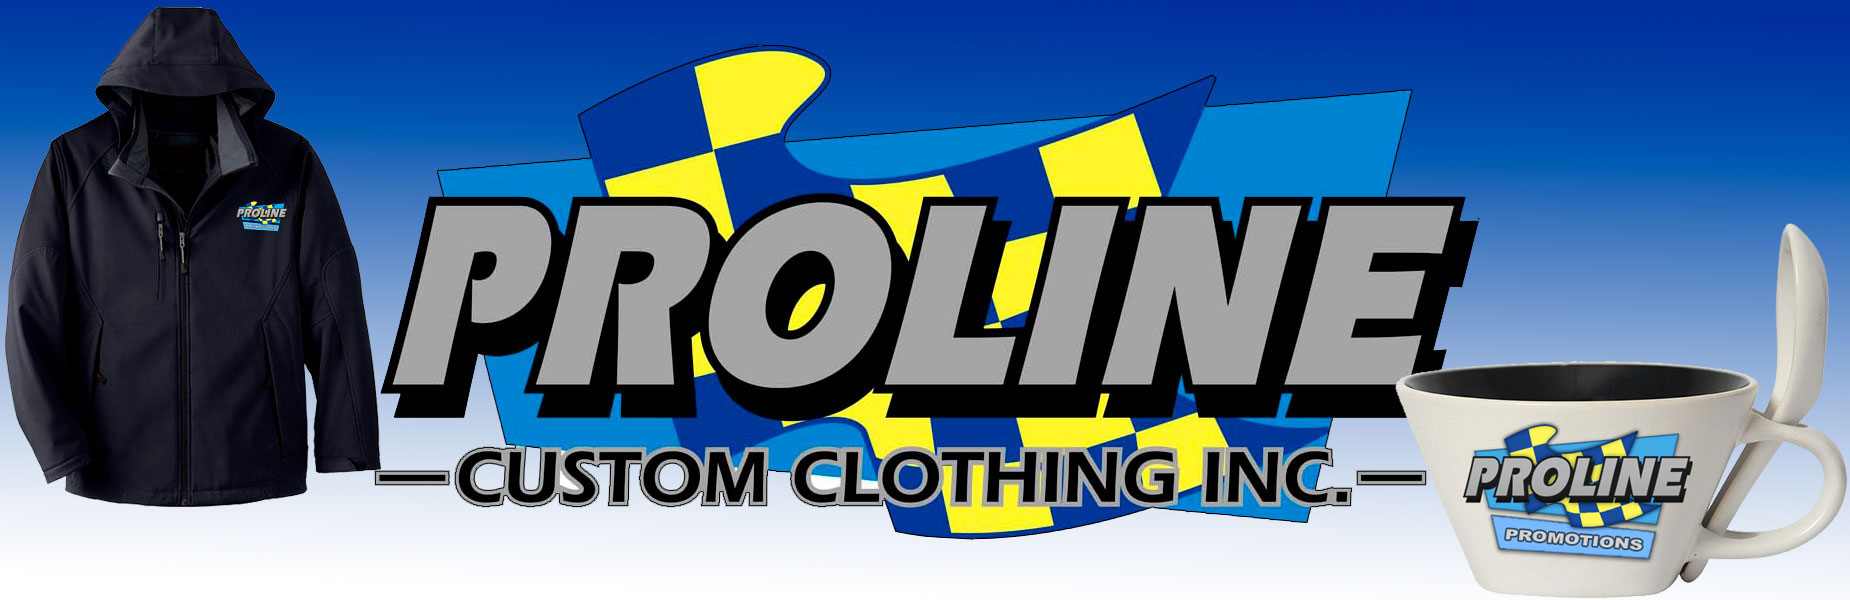 Proline Custom Clothing Inc. is a family-owned Canadian business specializing in corporate apparel and other promotional items.